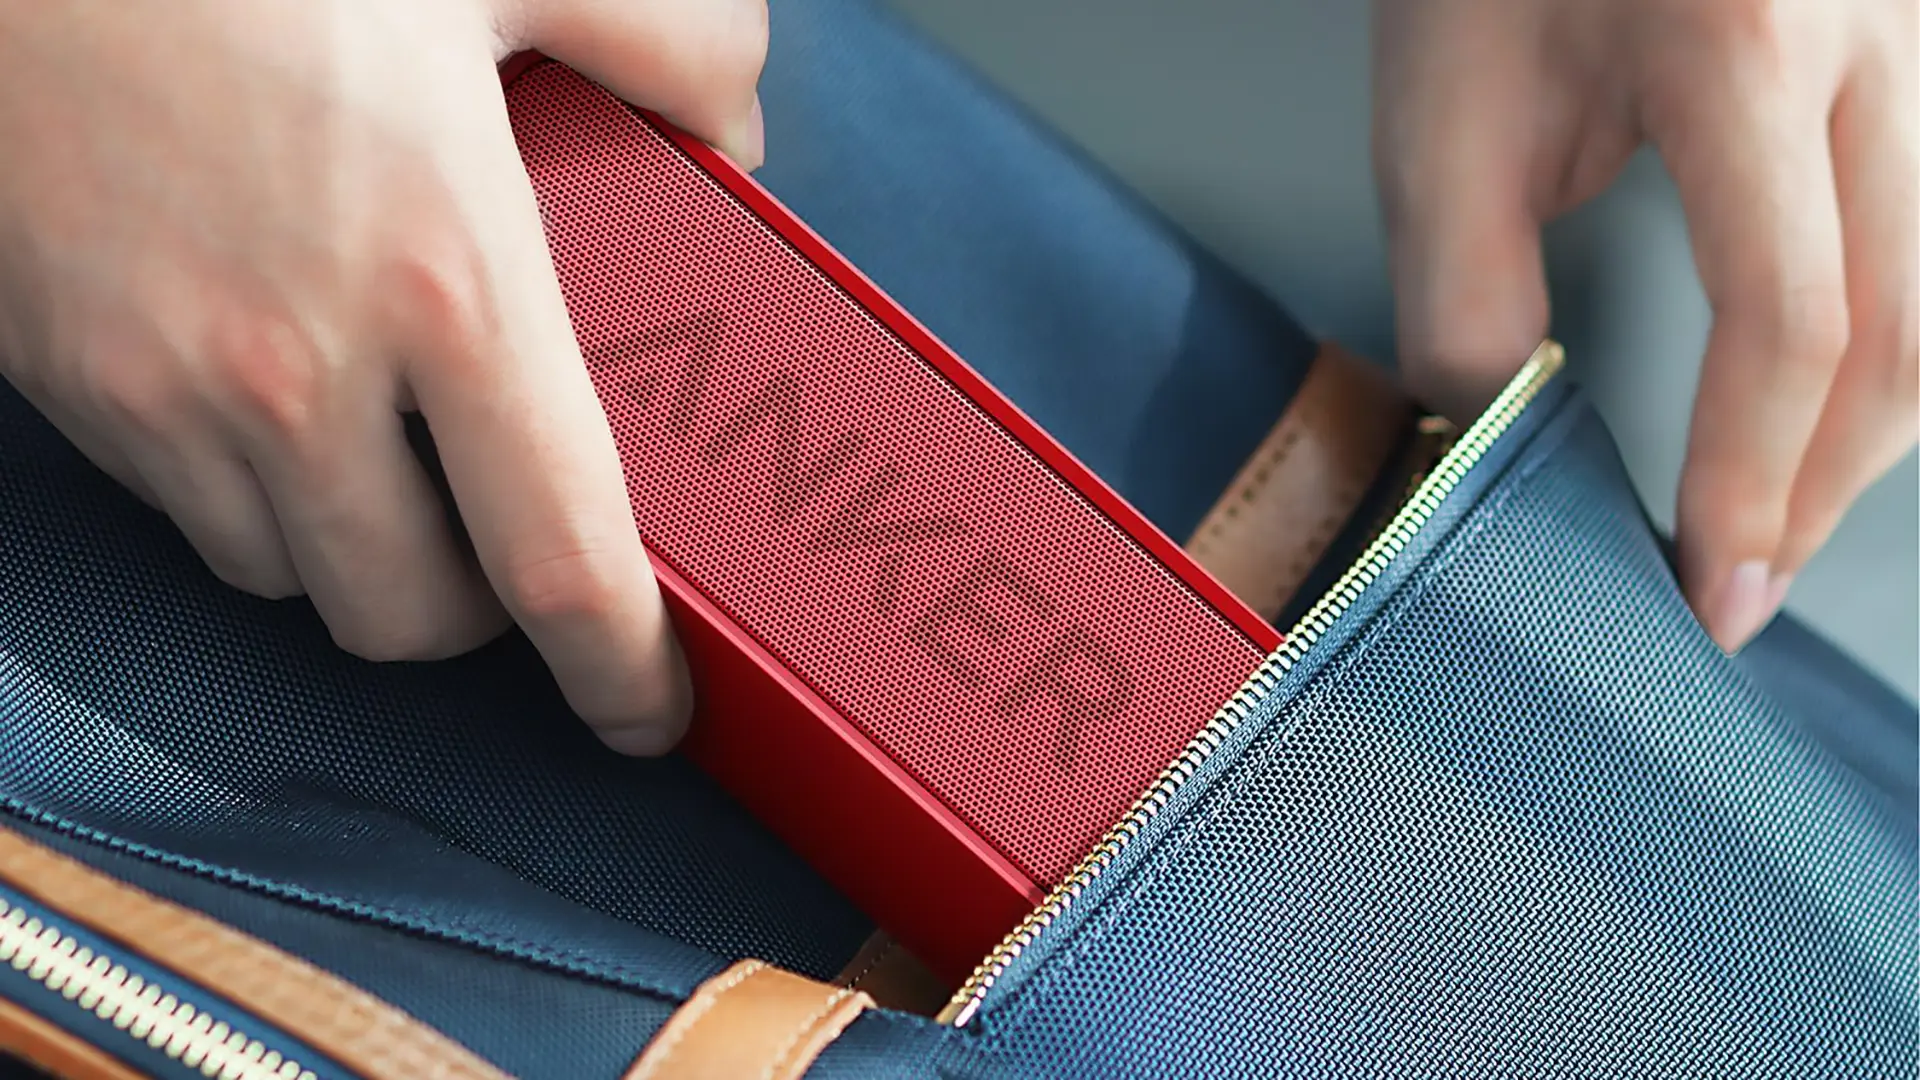 Anker SoundCore Bluetooth speaker in red showing relative size and portability qtooth review